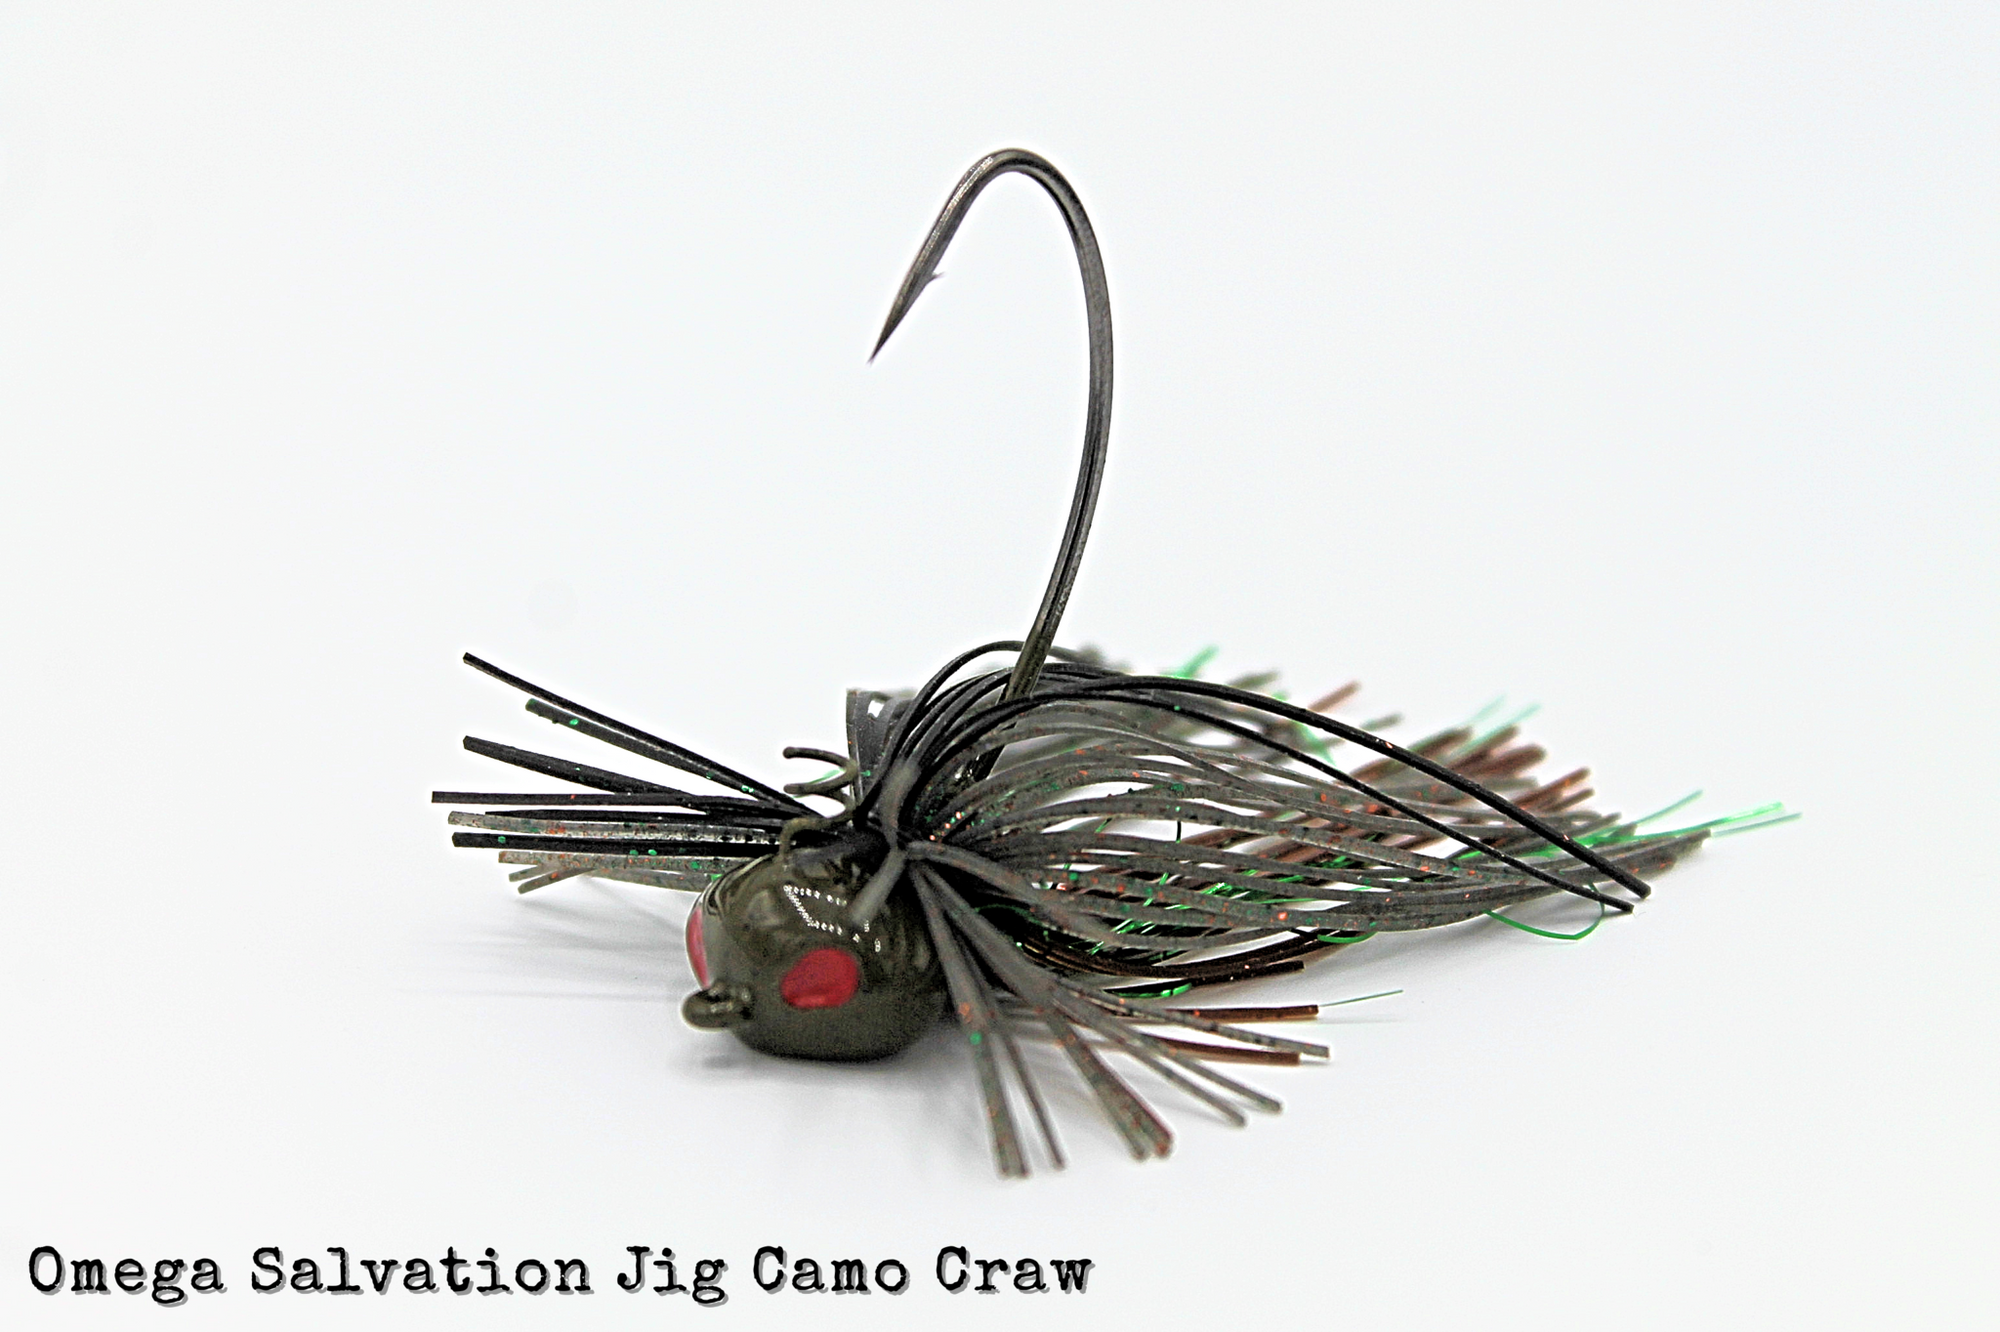 The long awaited release of the Omega Salvation jig is over!!